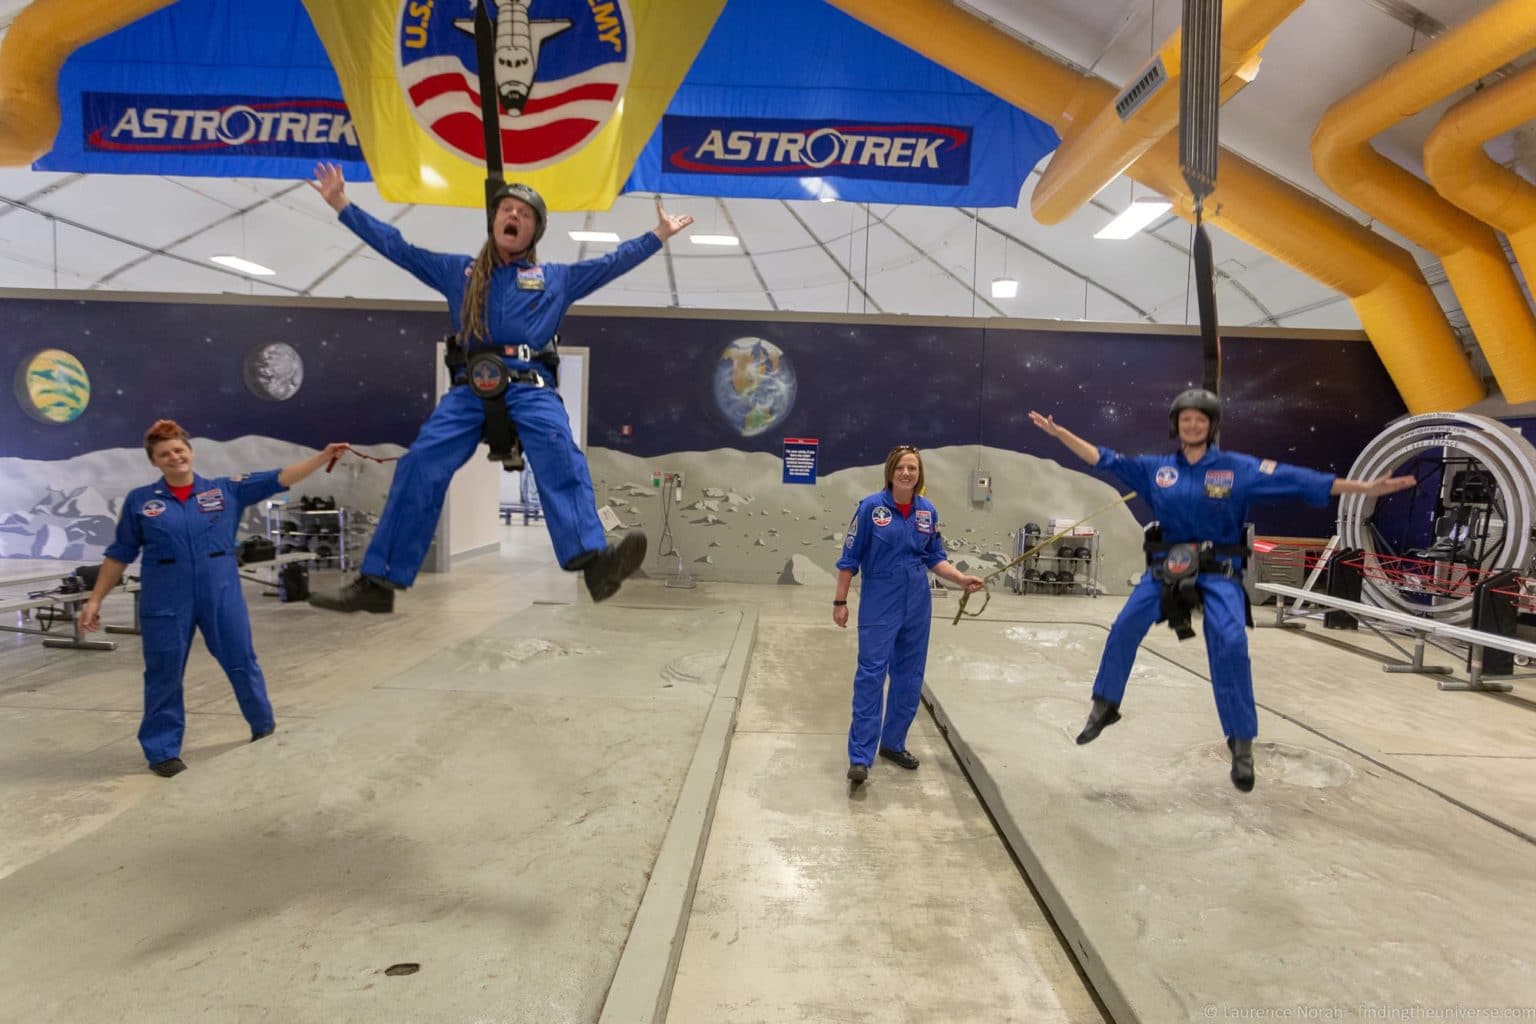 A Complete Guide to Space Camp in Huntsville Alabama